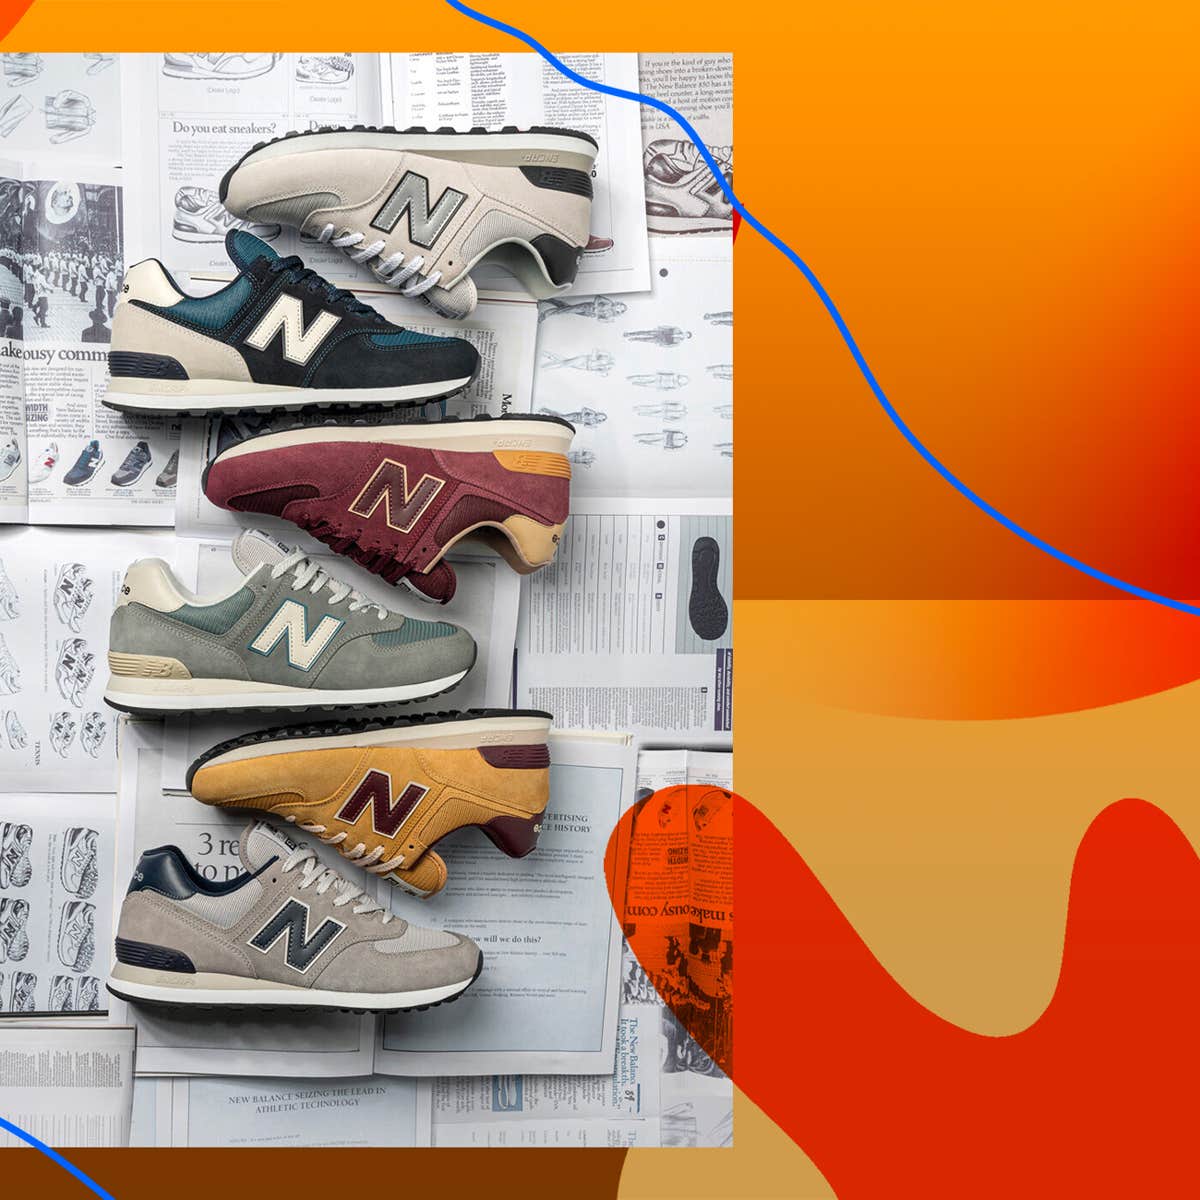 The New Balance Sneakers According To Reviews